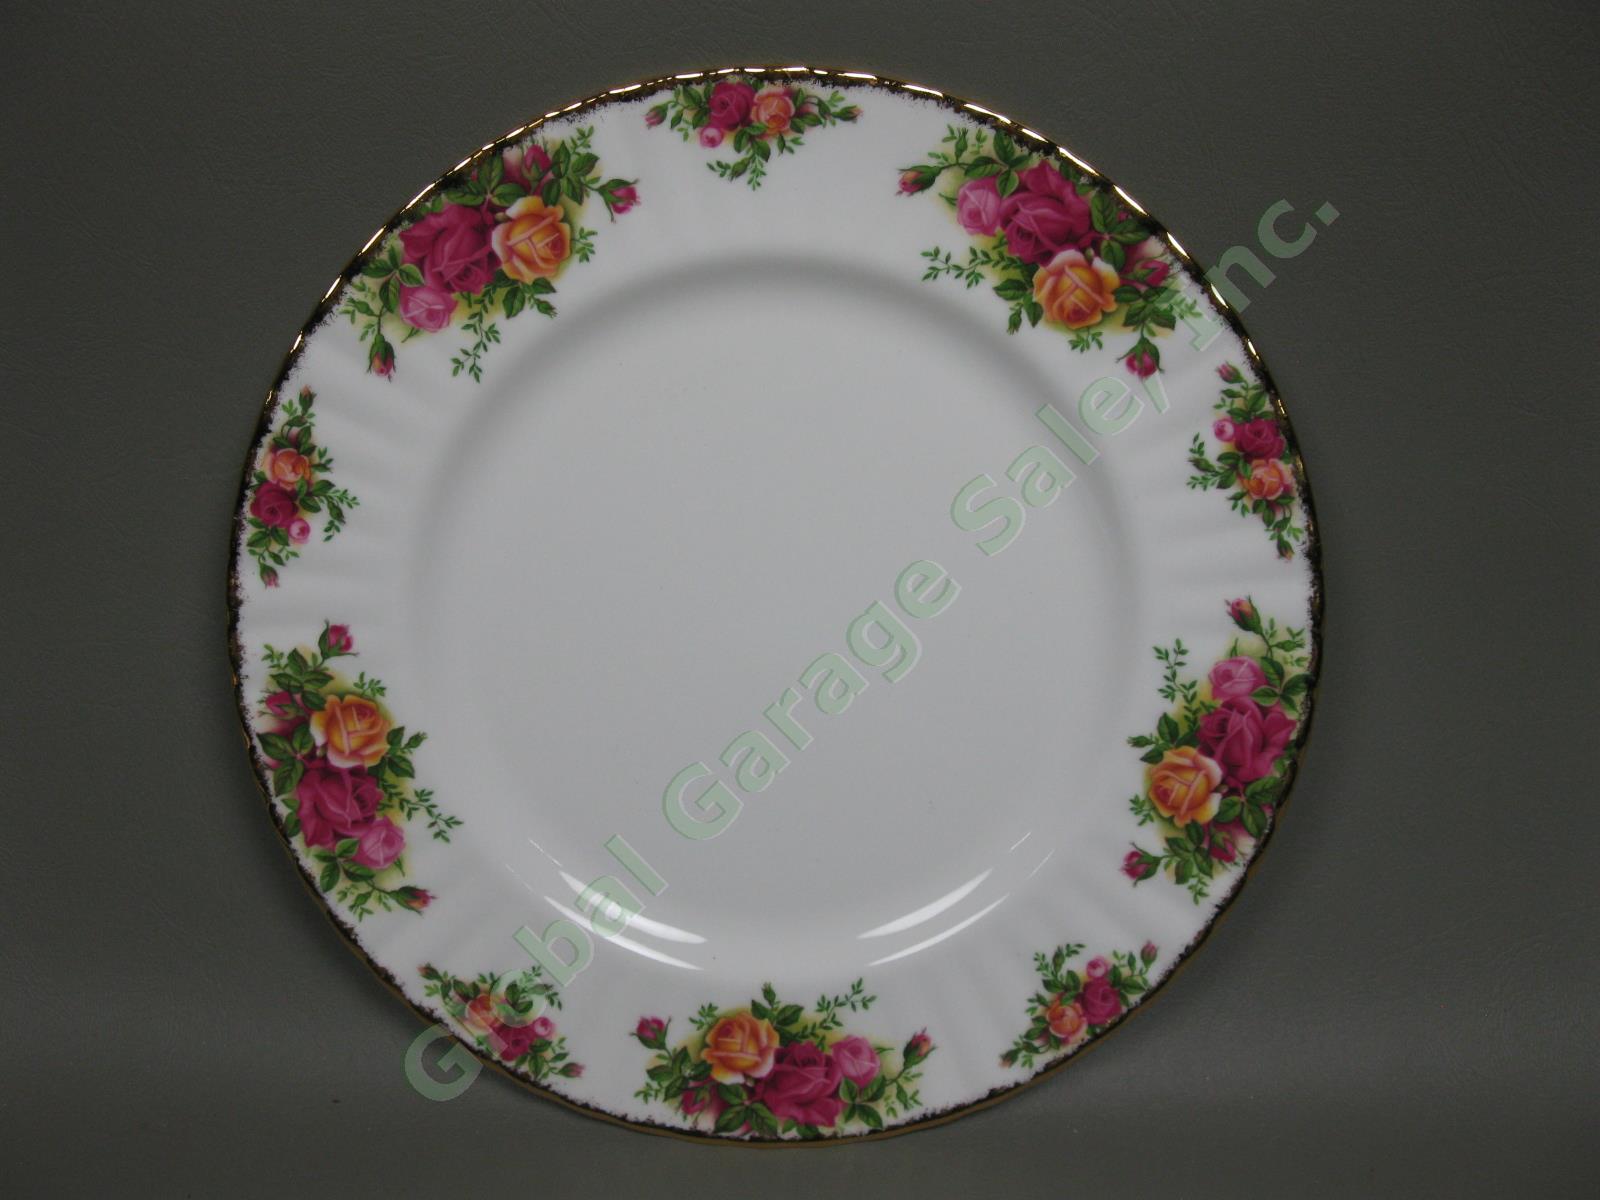 4 Royal Albert Old Country Roses Place Settings Serving Bowl Platter Plate Set 10